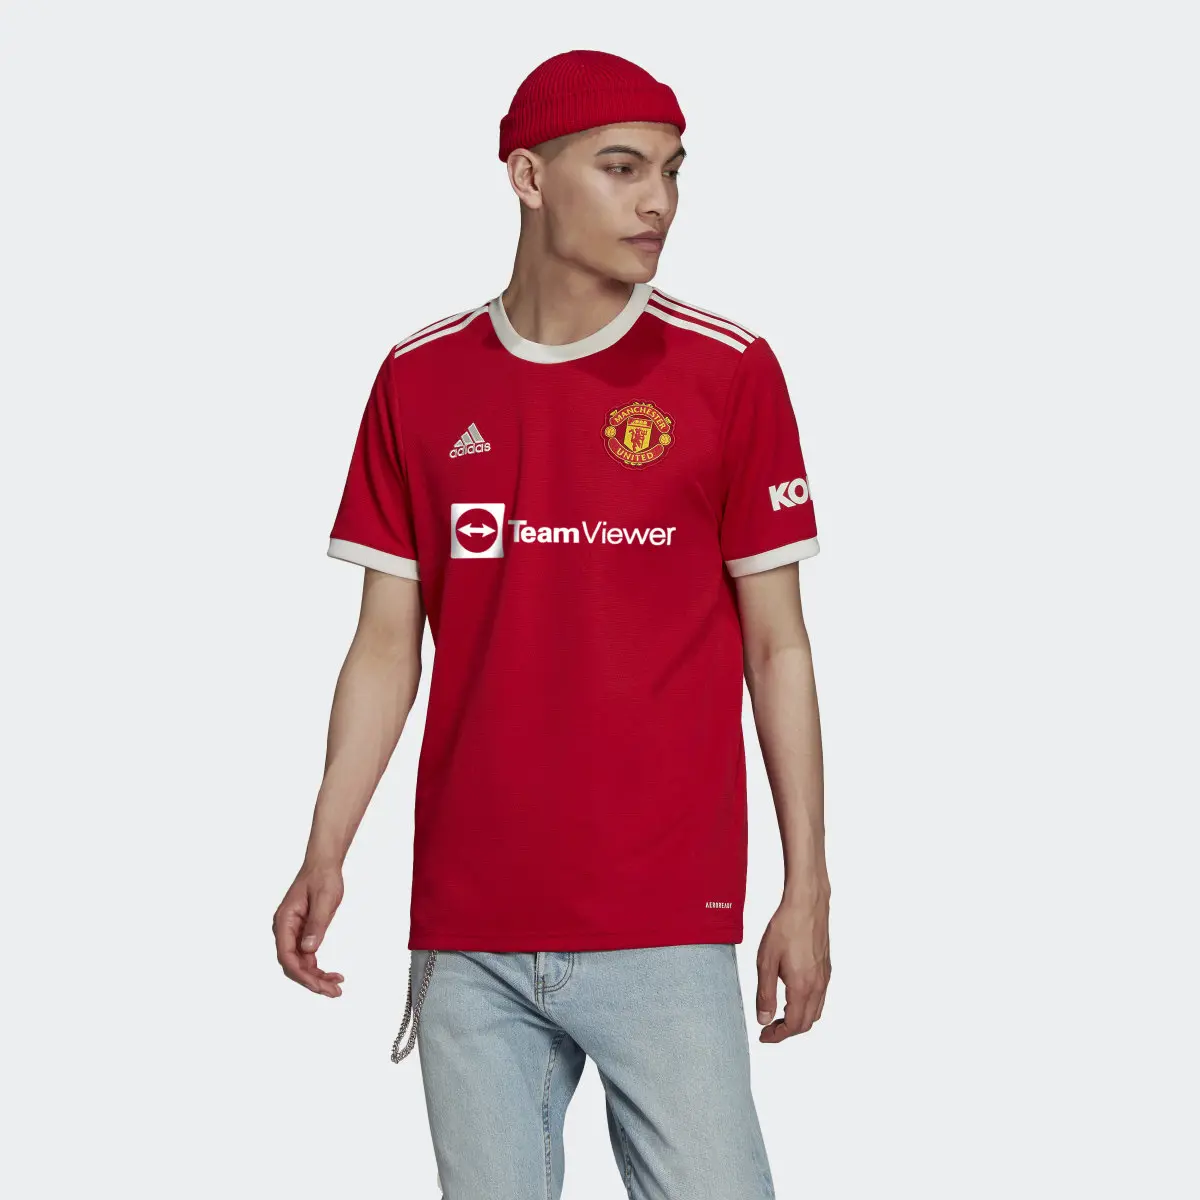 Adidas Maillot Domicile Manchester United 21/22. 2